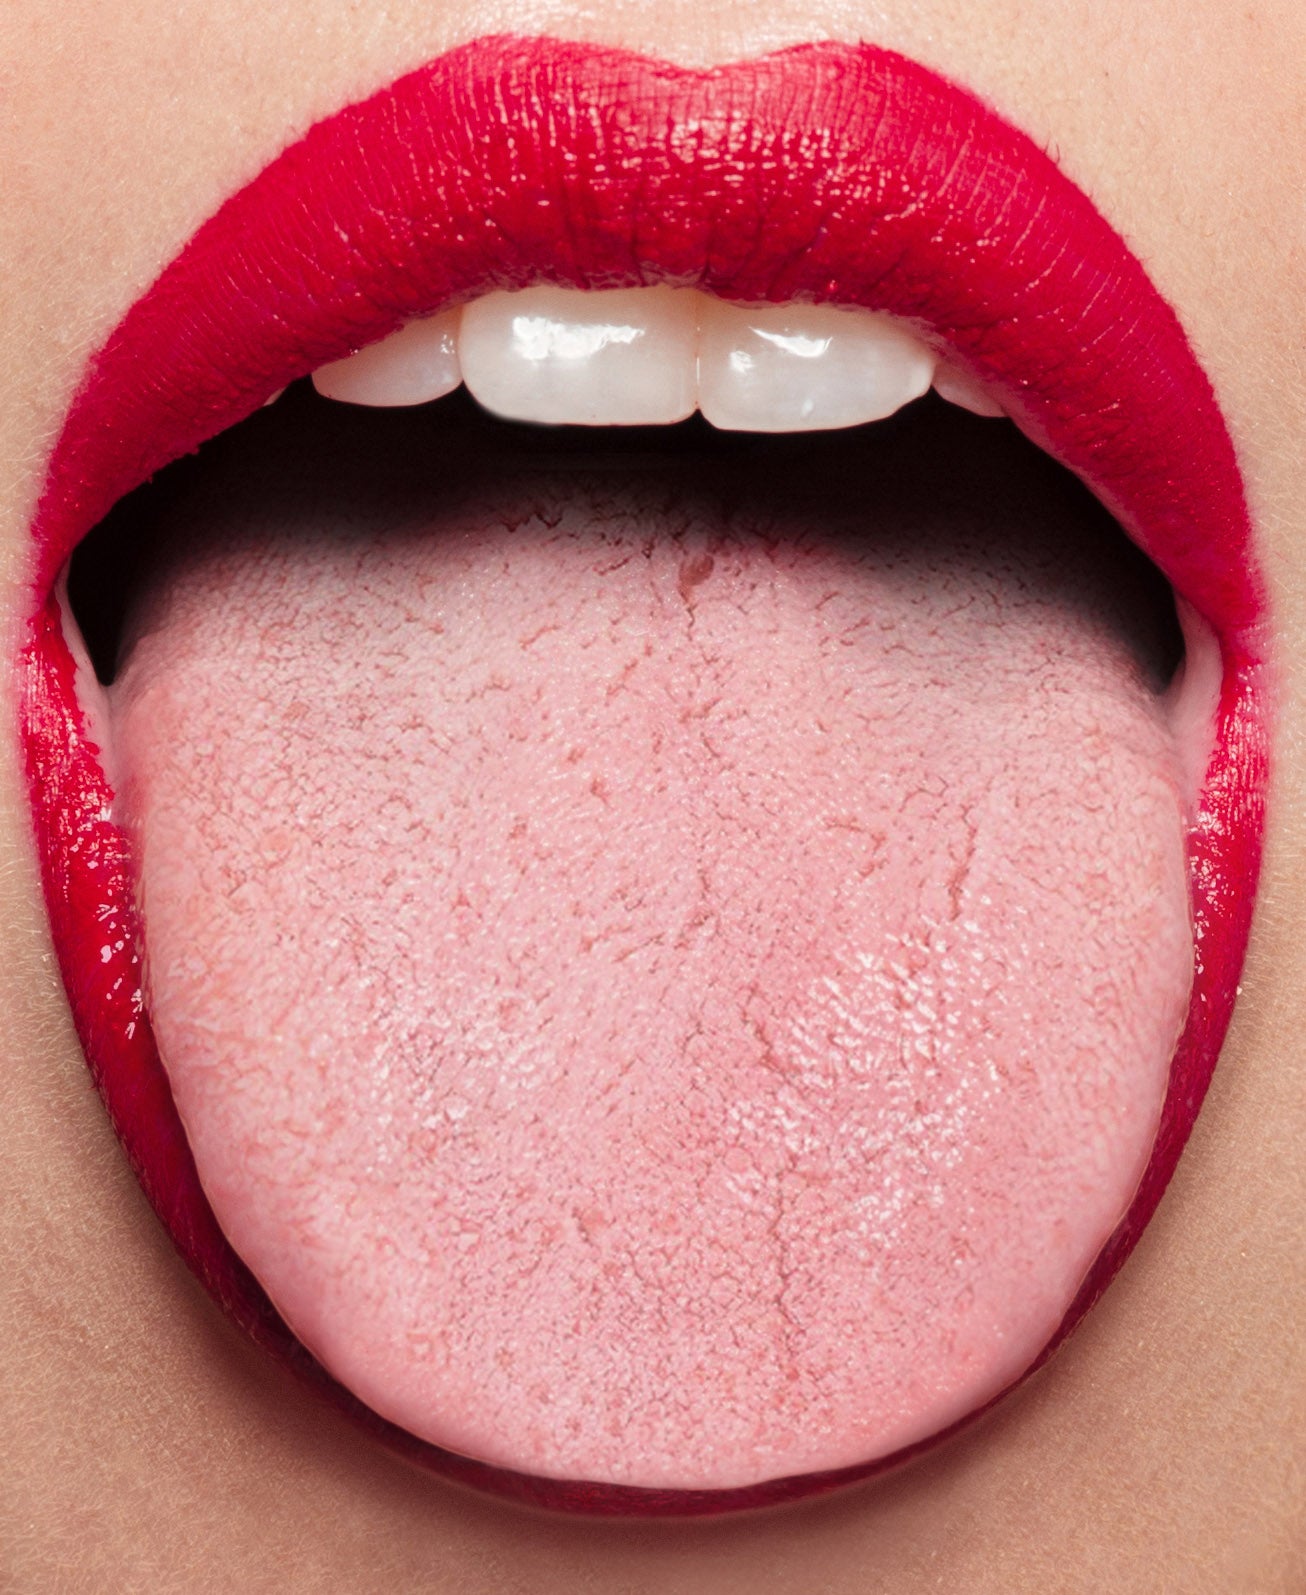 Tongue showing signs of white film/toxins